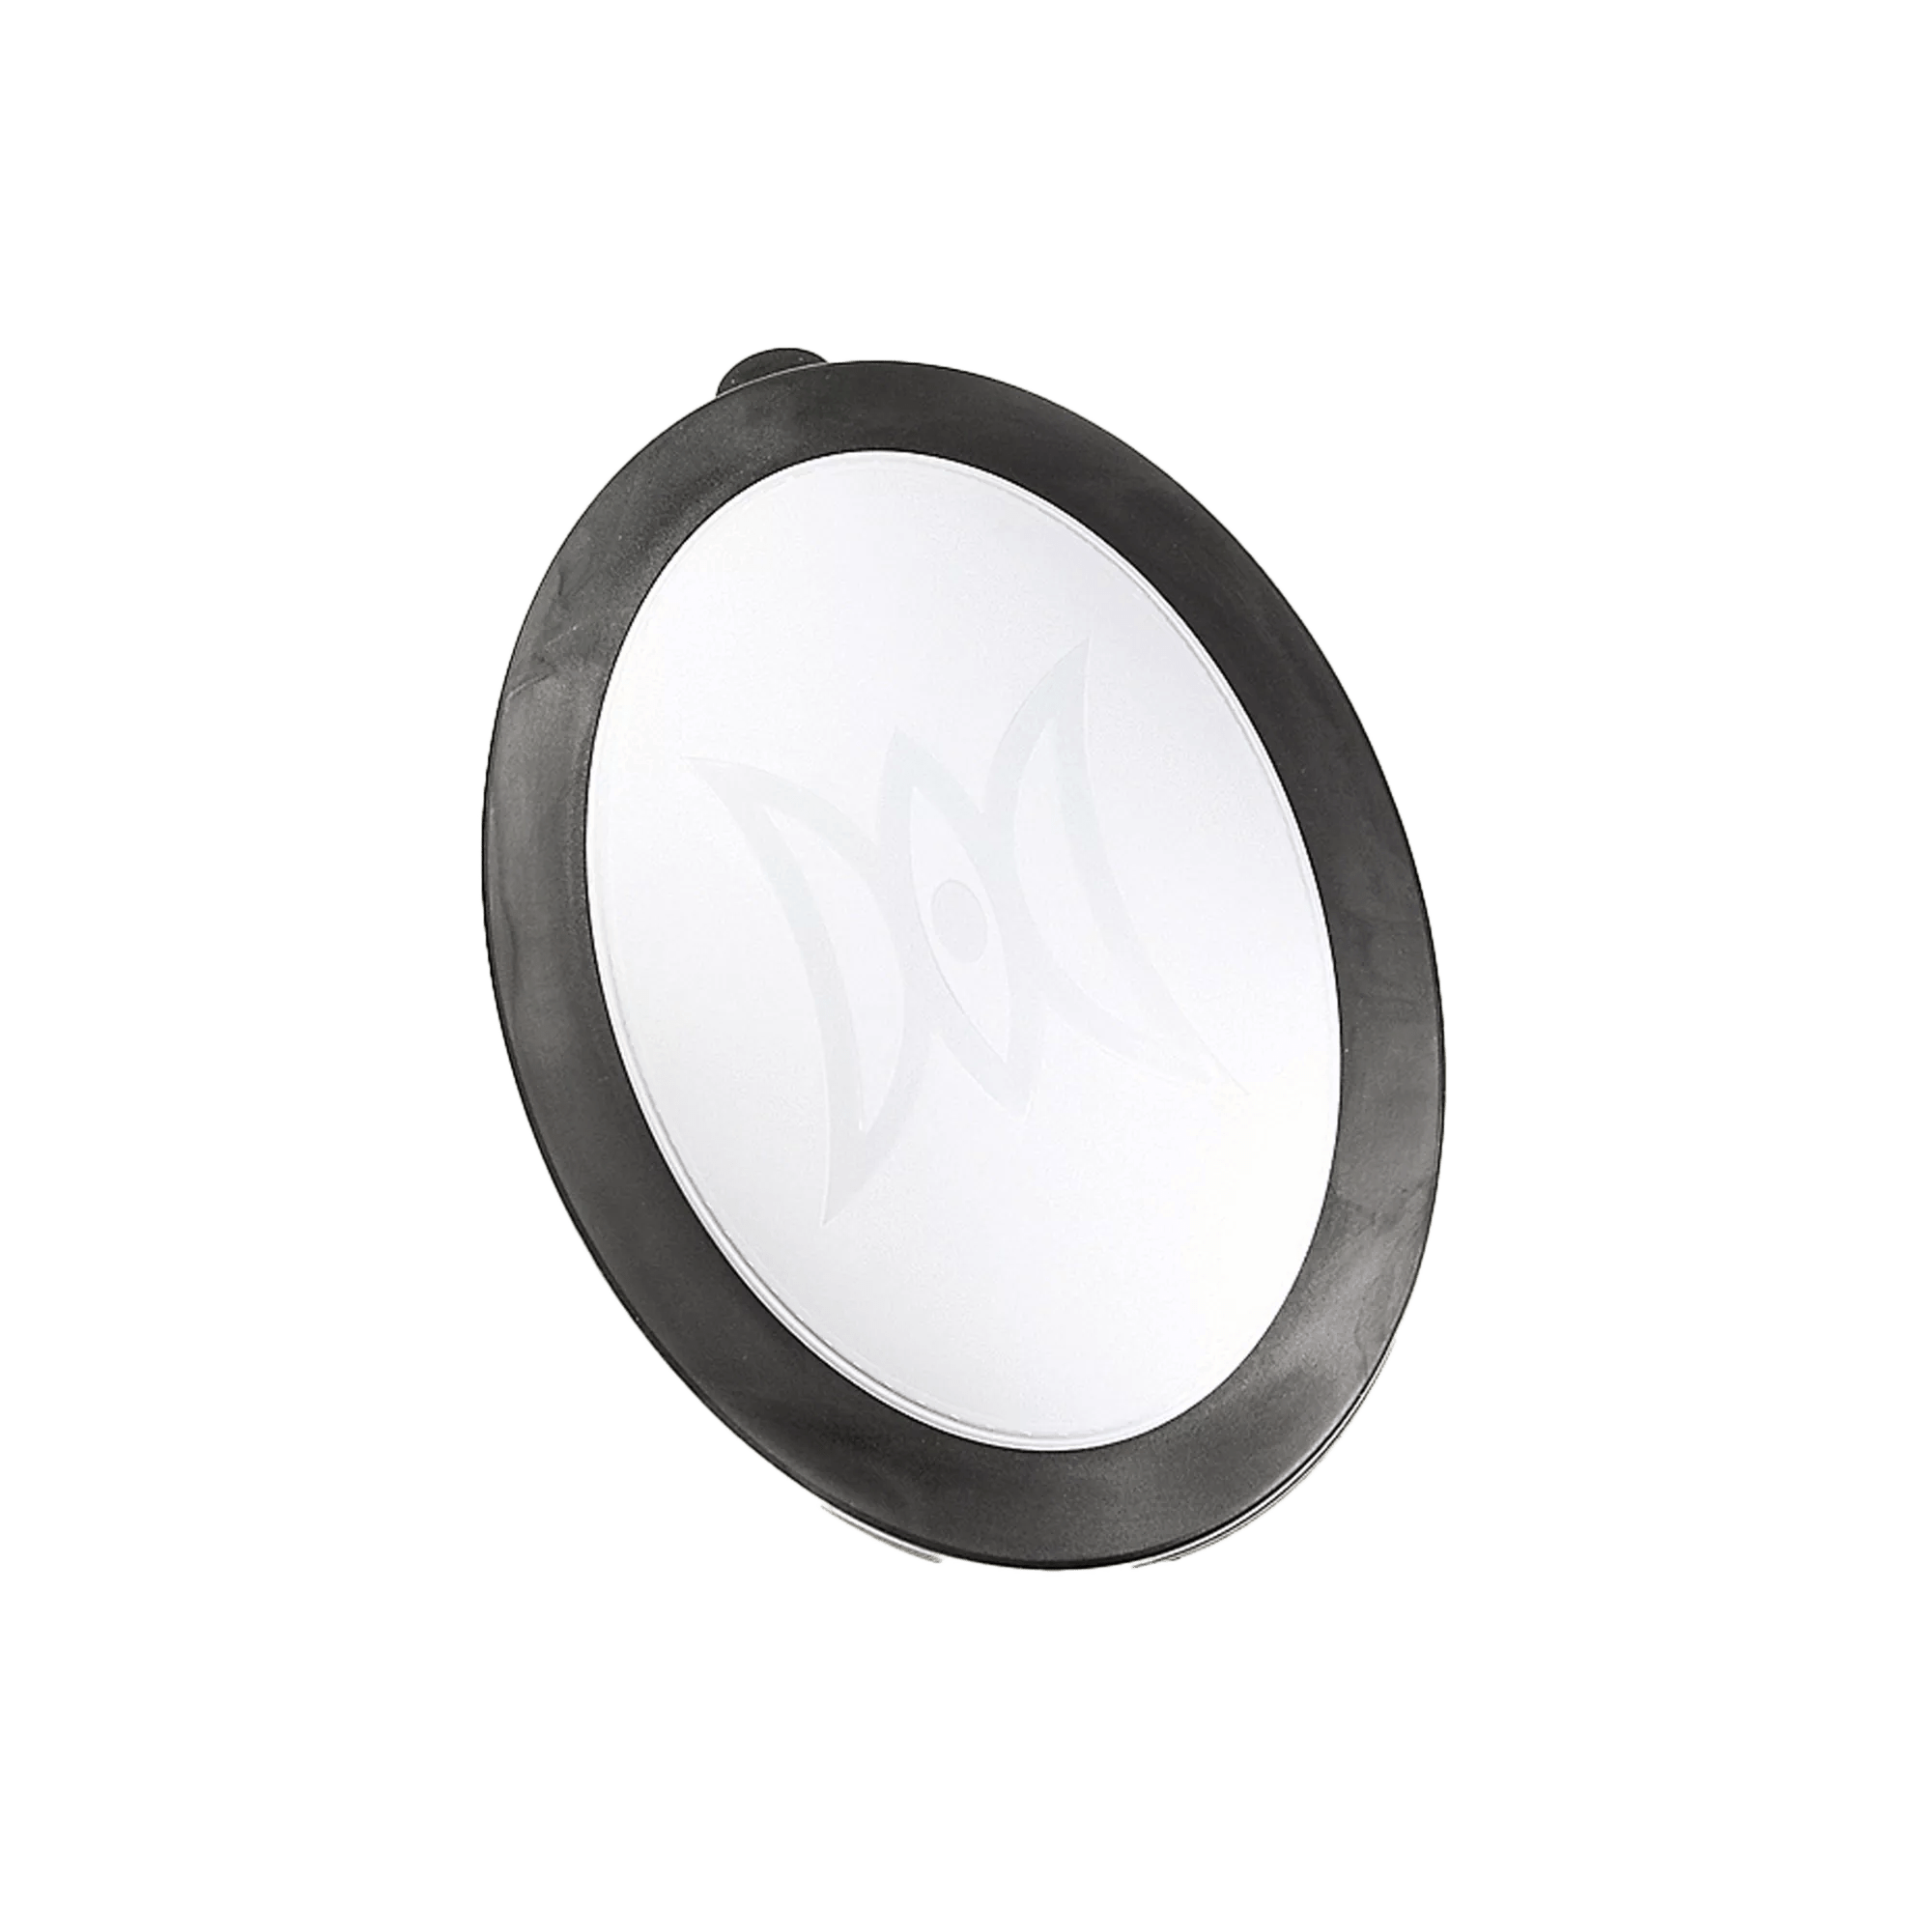 PERCEPTION - Perception Oval Hatch Cover W/ Tether -  - 9810038 - ISO 